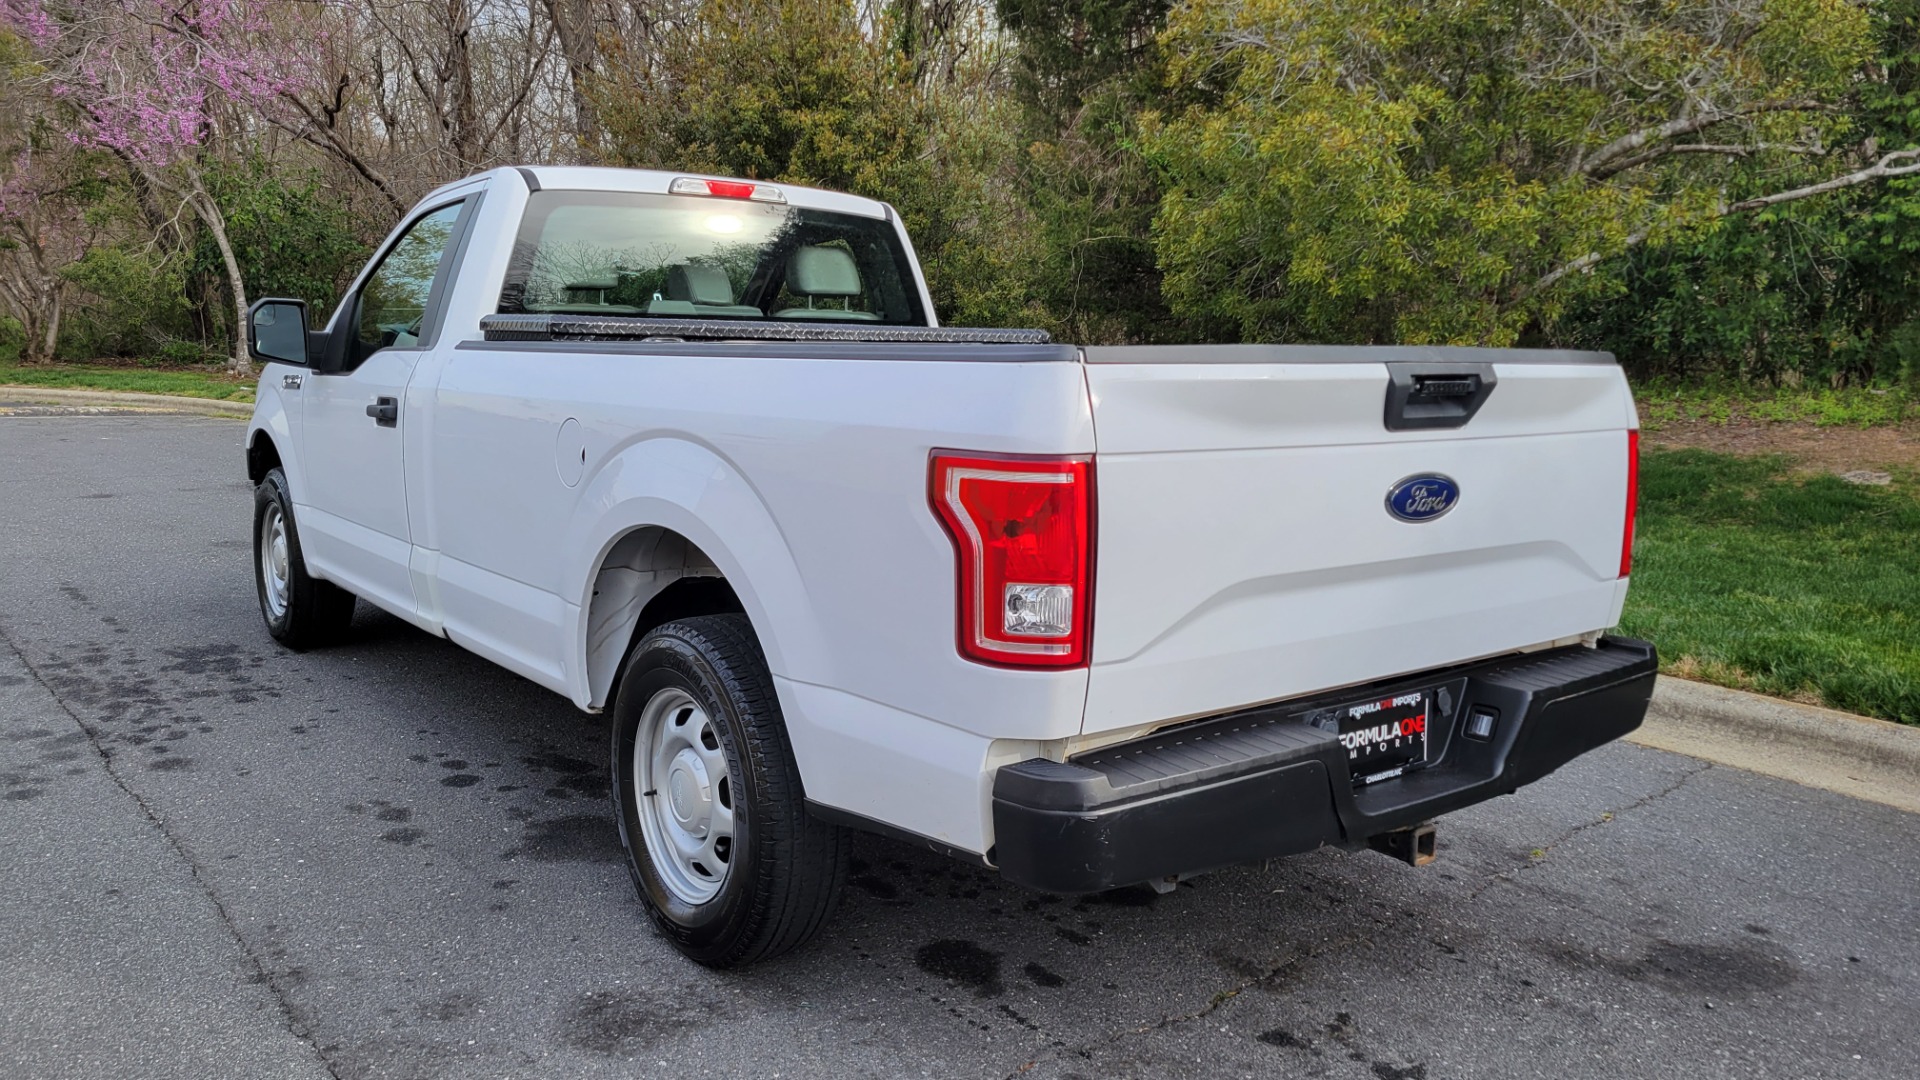 Used 2016 Ford F-150 XL REGULAR CAB 4X2 / 3.5L V6 / 6-SPD AUTO / TOWING / TOOL BOX for sale $13,499 at Formula Imports in Charlotte NC 28227 3